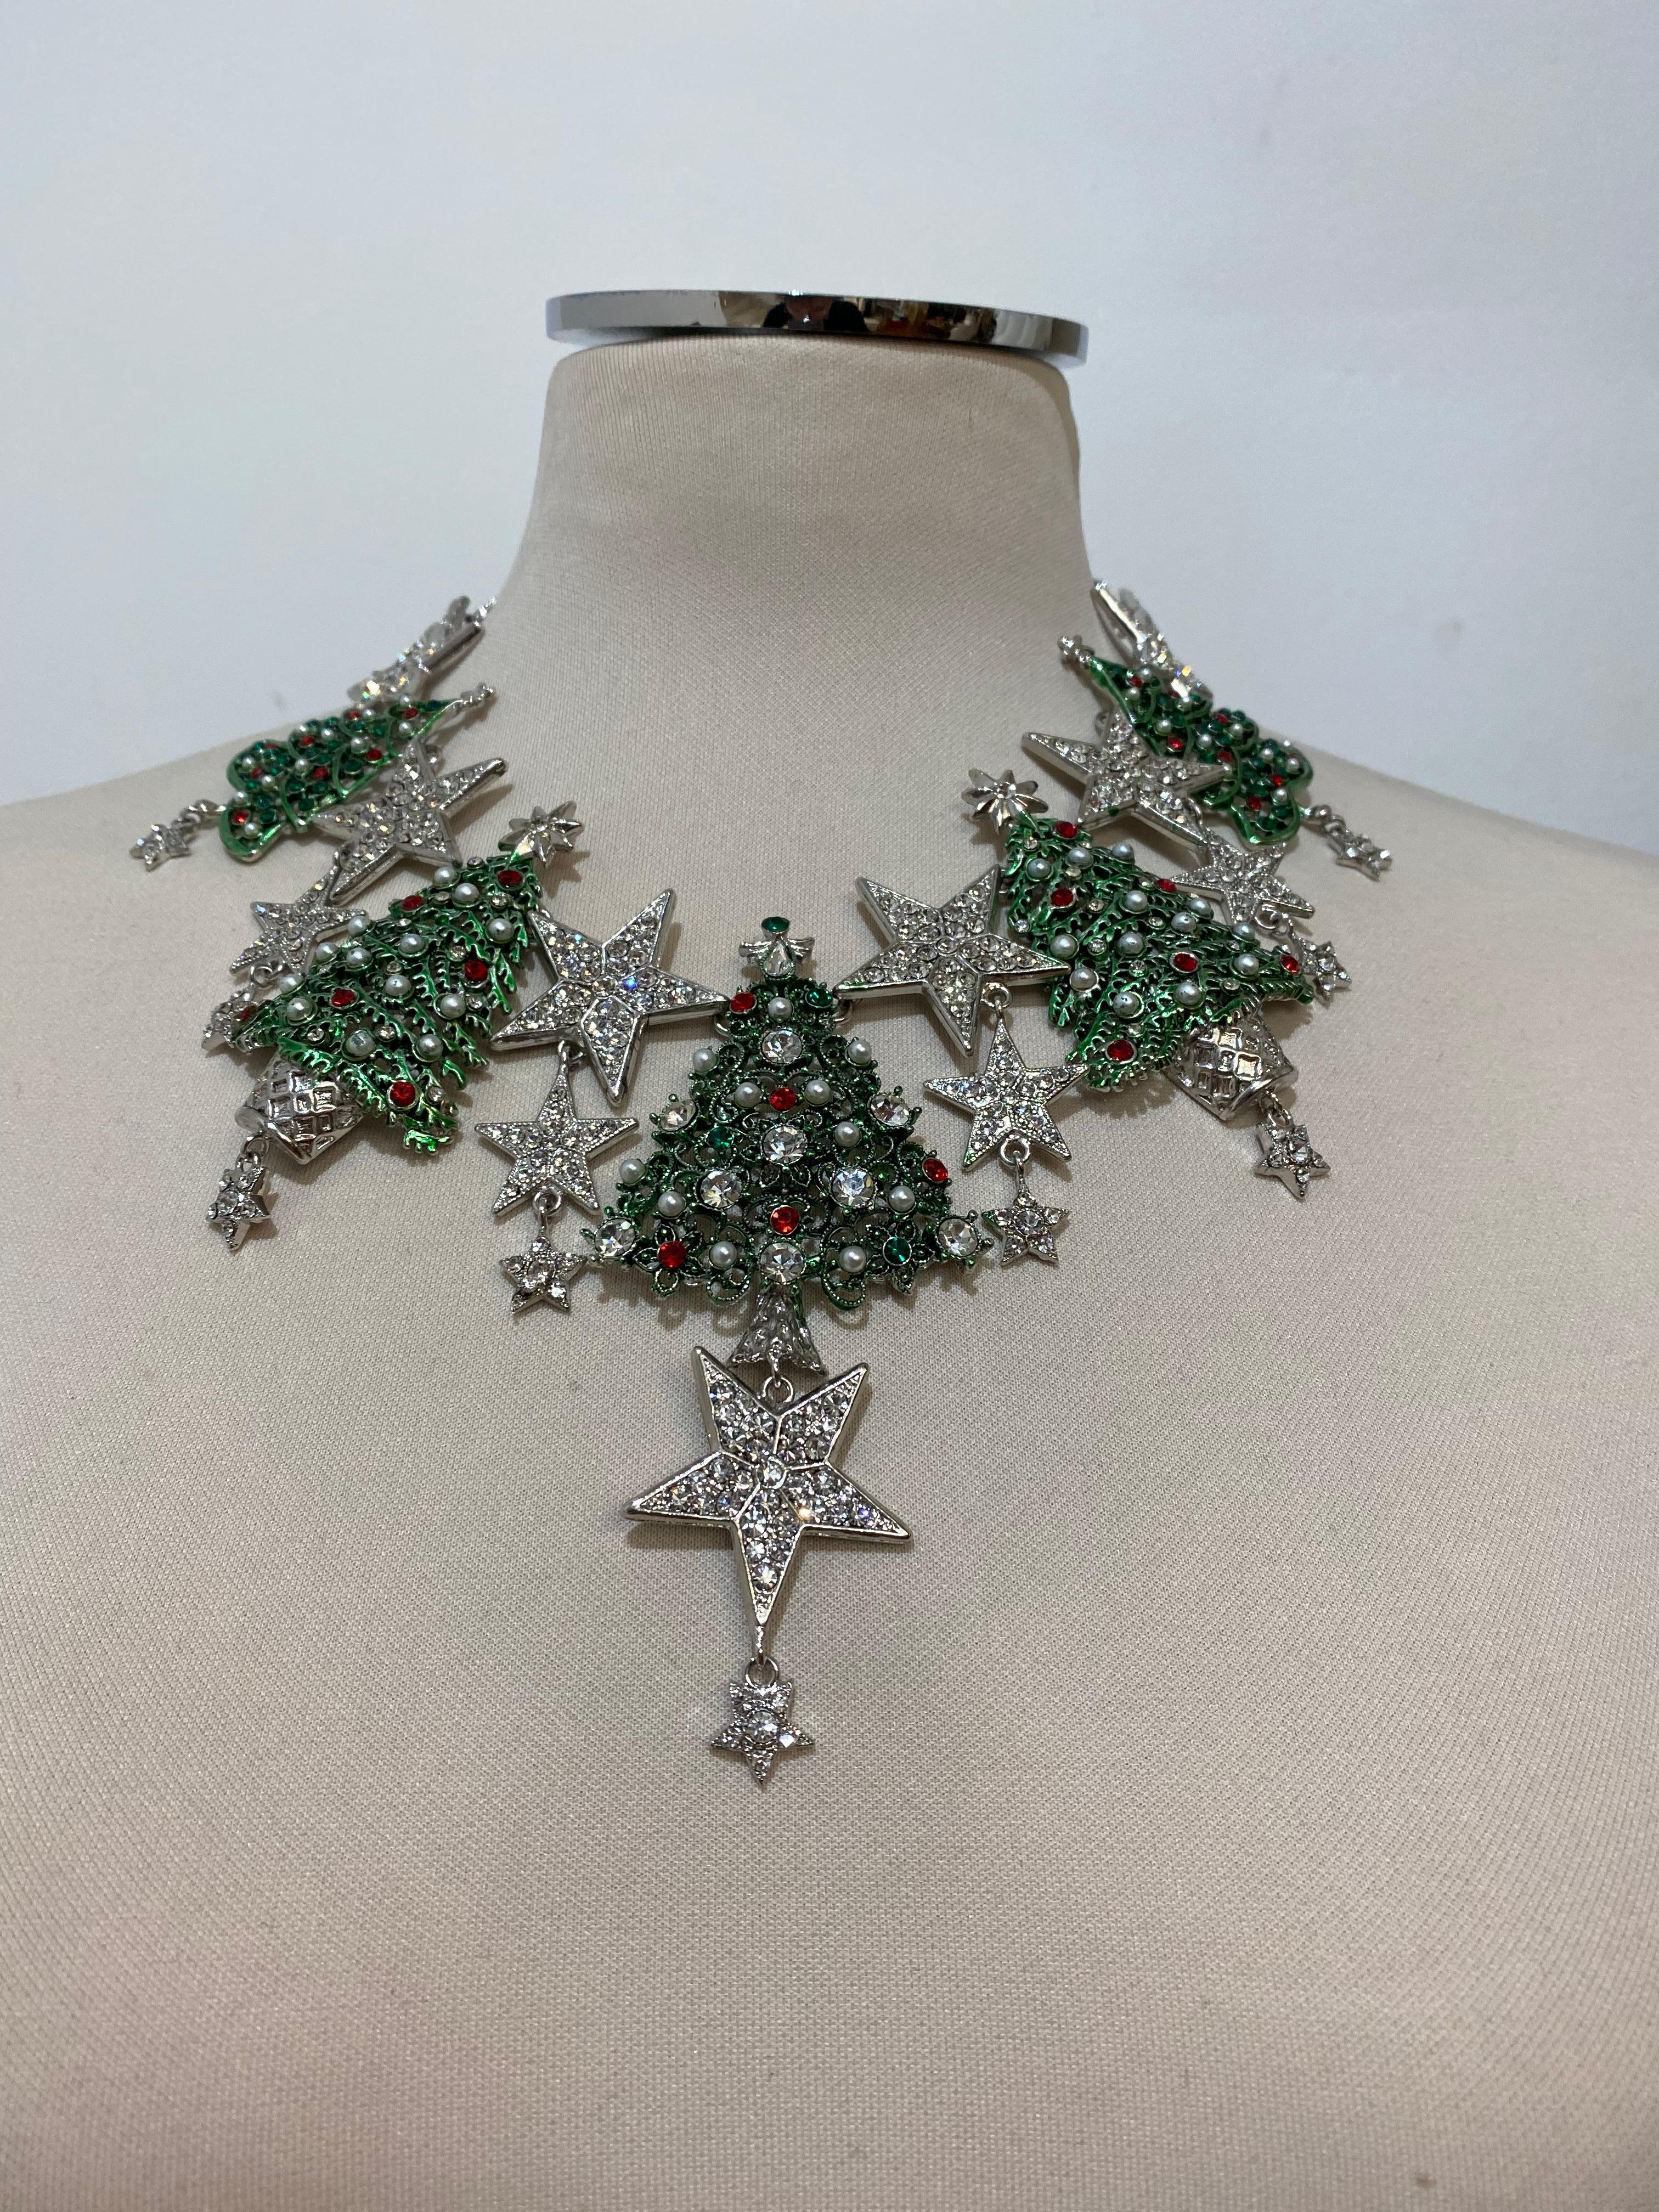 Amazing and special Carlo Zini Christmas choker
One of the world's best bijoux designers
Non allergenic rhodium
Hand painted 
Christmas theme, trees
Wonderful construction of Swarovski crystals 
Made in Italy, artisanal way
Worldwide express